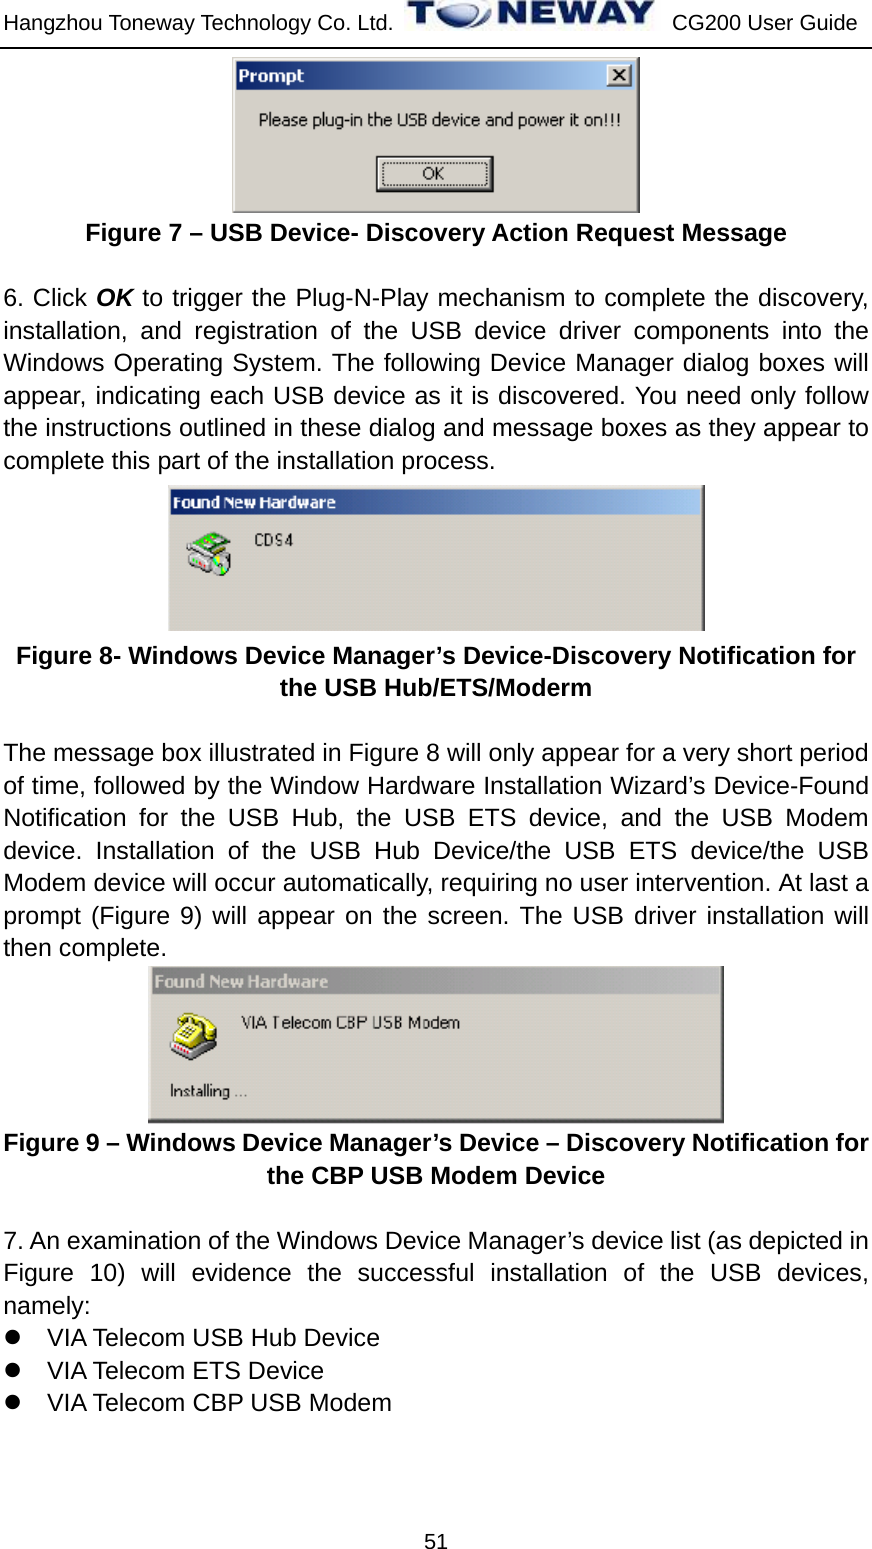 Hangzhou Toneway Technology Co. Ltd.    CG200 User Guide 51  Figure 7 – USB Device- Discovery Action Request Message  6. Click OK to trigger the Plug-N-Play mechanism to complete the discovery, installation, and registration of the USB device driver components into the Windows Operating System. The following Device Manager dialog boxes will appear, indicating each USB device as it is discovered. You need only follow the instructions outlined in these dialog and message boxes as they appear to complete this part of the installation process.  Figure 8- Windows Device Manager’s Device-Discovery Notification for the USB Hub/ETS/Moderm  The message box illustrated in Figure 8 will only appear for a very short period of time, followed by the Window Hardware Installation Wizard’s Device-Found Notification for the USB Hub, the USB ETS device, and the USB Modem device. Installation of the USB Hub Device/the USB ETS device/the USB Modem device will occur automatically, requiring no user intervention. At last a prompt (Figure 9) will appear on the screen. The USB driver installation will then complete.  Figure 9 – Windows Device Manager’s Device – Discovery Notification for the CBP USB Modem Device  7. An examination of the Windows Device Manager’s device list (as depicted in Figure 10) will evidence the successful installation of the USB devices, namely: z  VIA Telecom USB Hub Device z VIA Telecom ETS Device z  VIA Telecom CBP USB Modem 